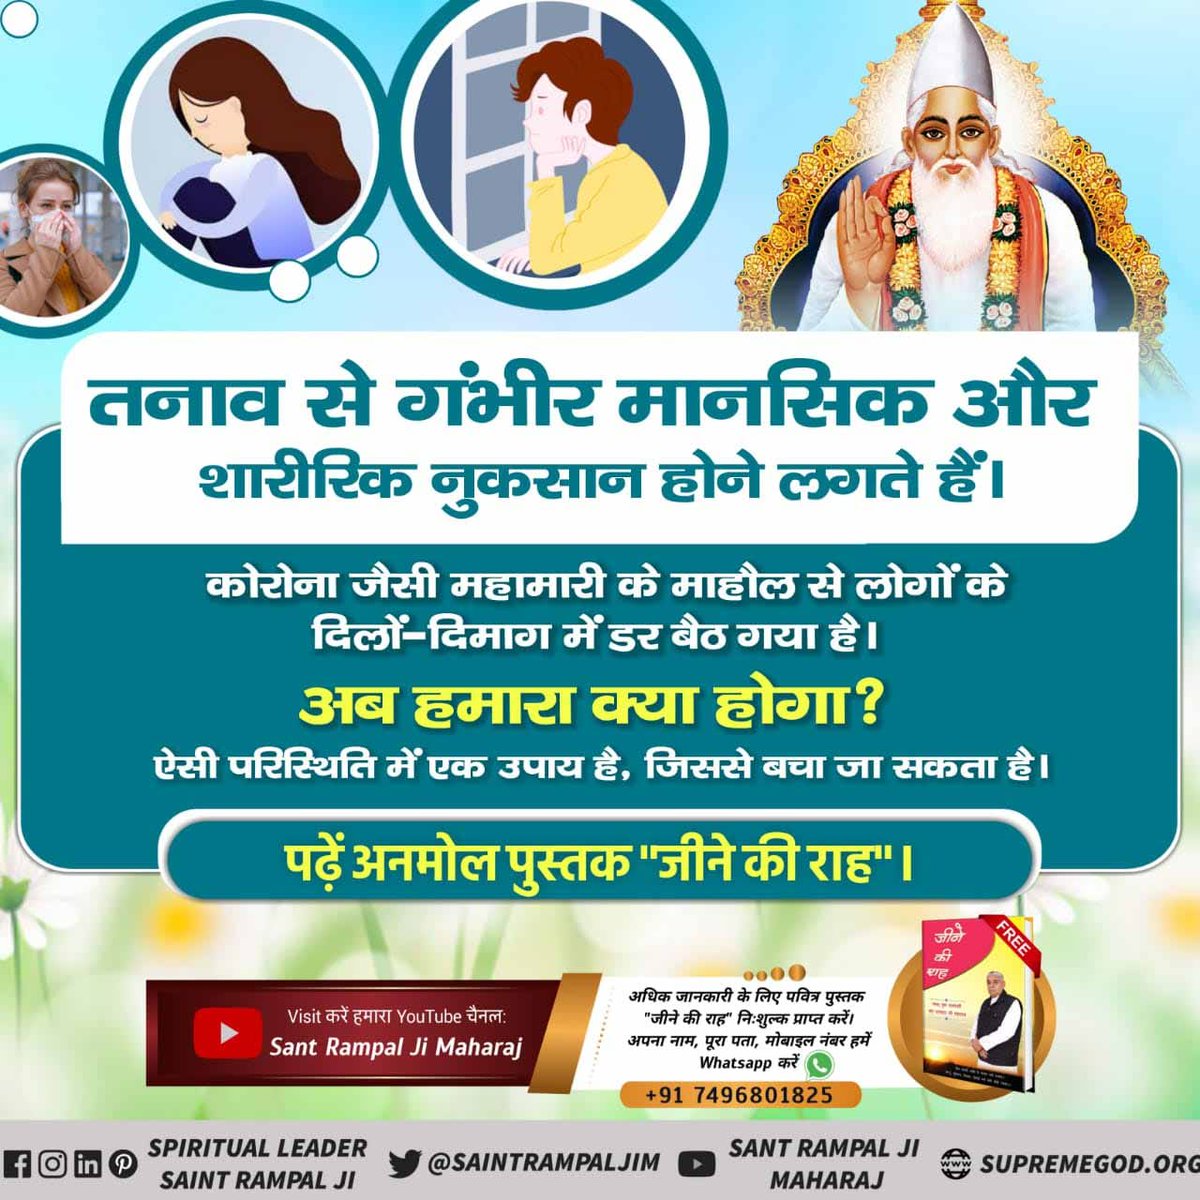 #मानसिक_शांति_नहींतो_कुछनहीं
The Book 'Jeene Ki Rah' is worthy of being kept in every home. By reading and following it, you will remain happy, both in this world and the other.
- Sant Rampal Ji Maharaj